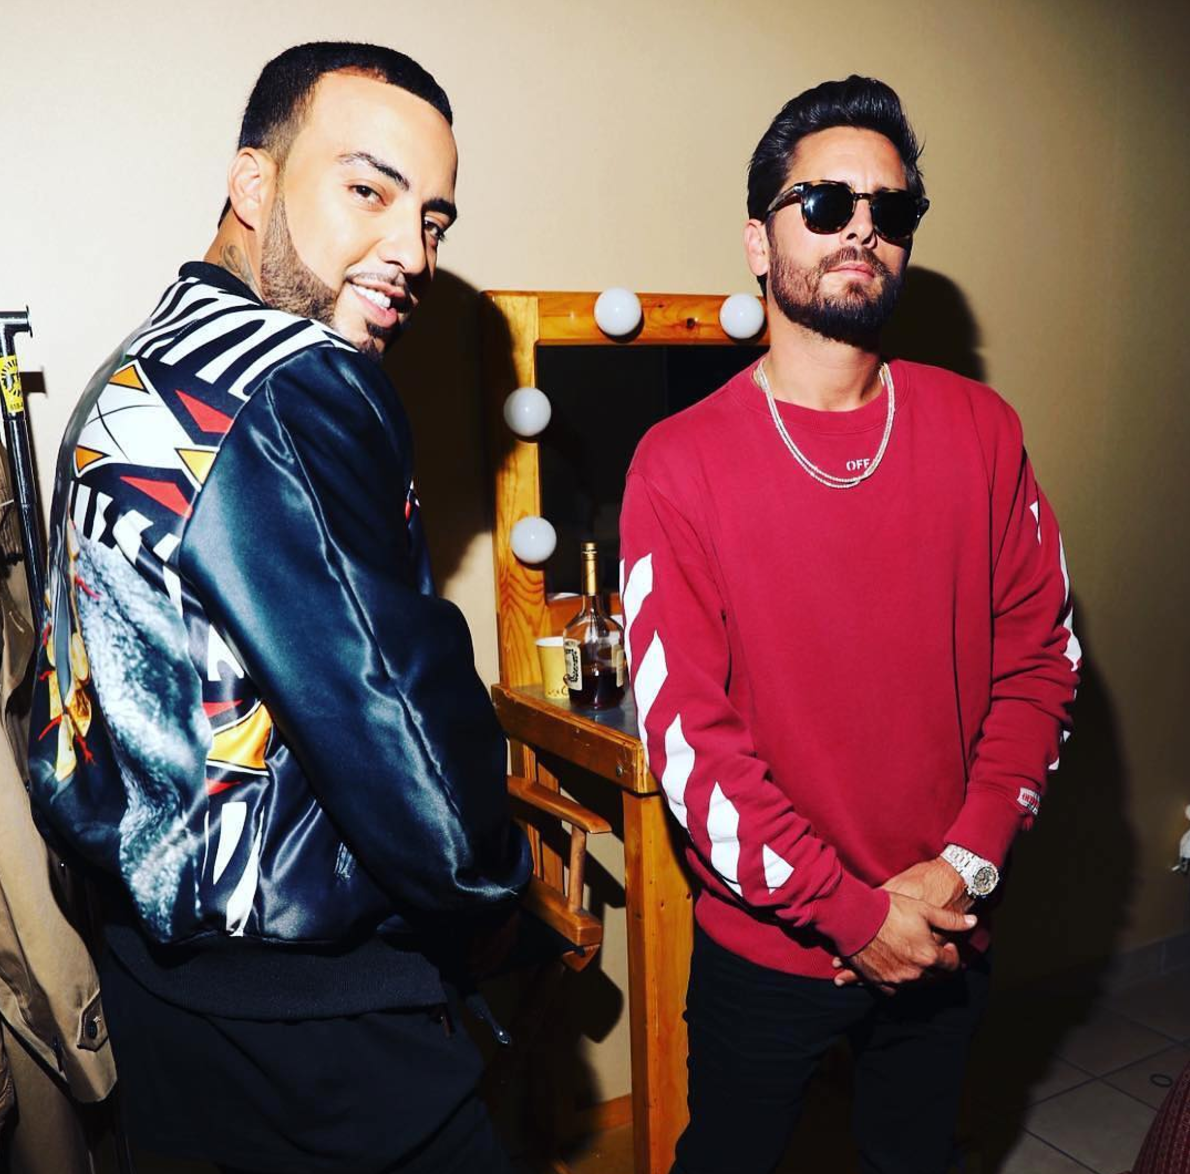 SPOTTED: French Montana In Gucci And Scott Disick In Off-White